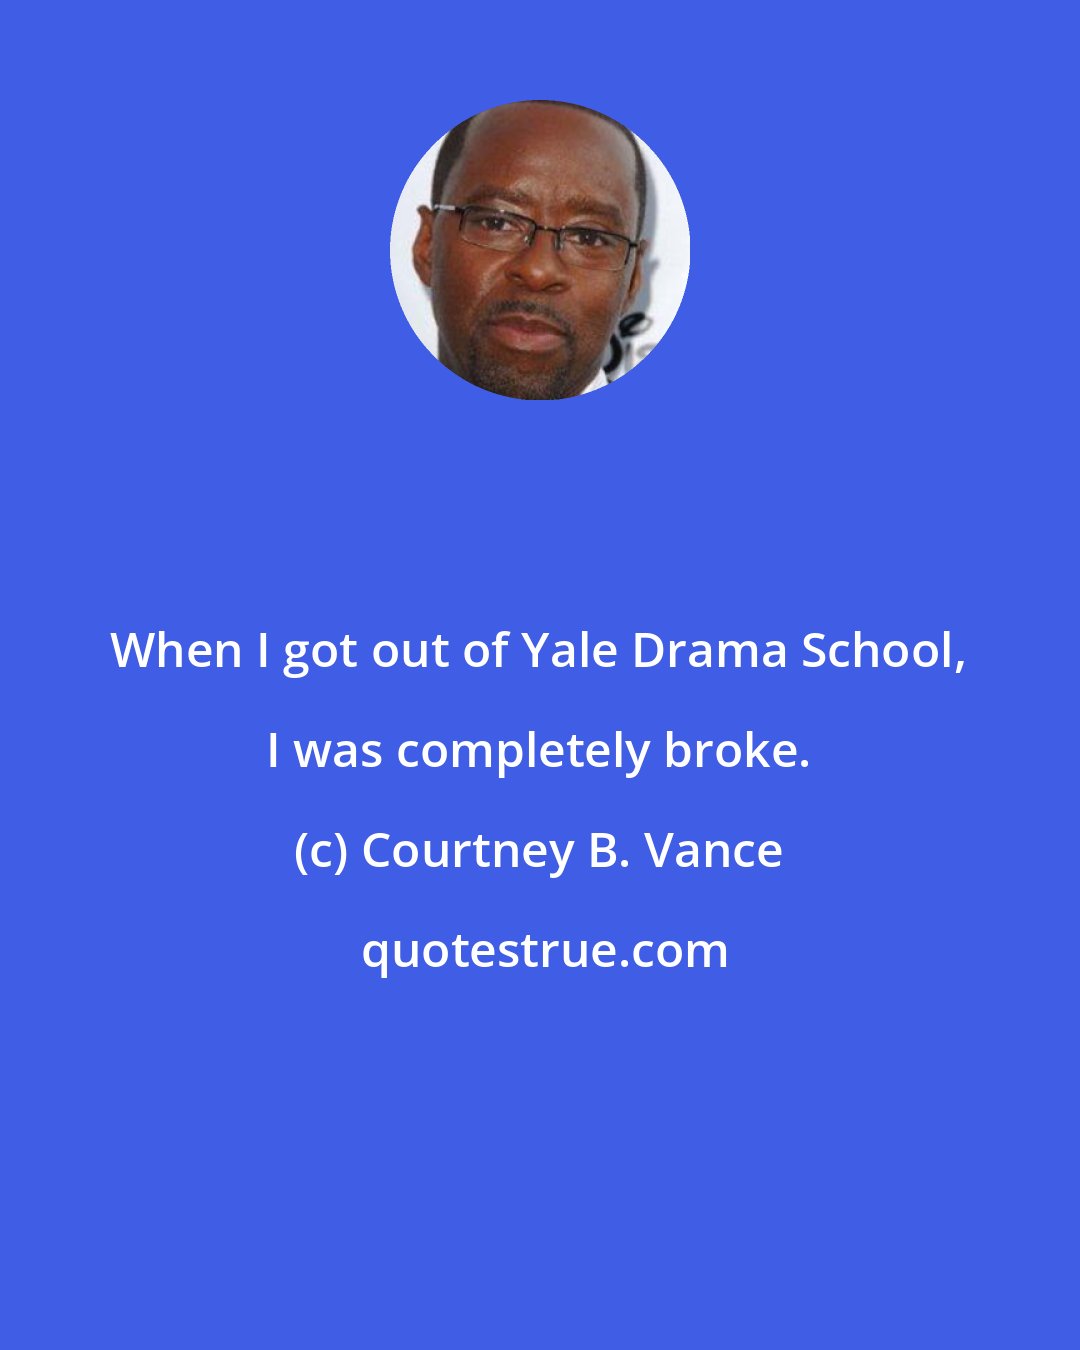 Courtney B. Vance: When I got out of Yale Drama School, I was completely broke.